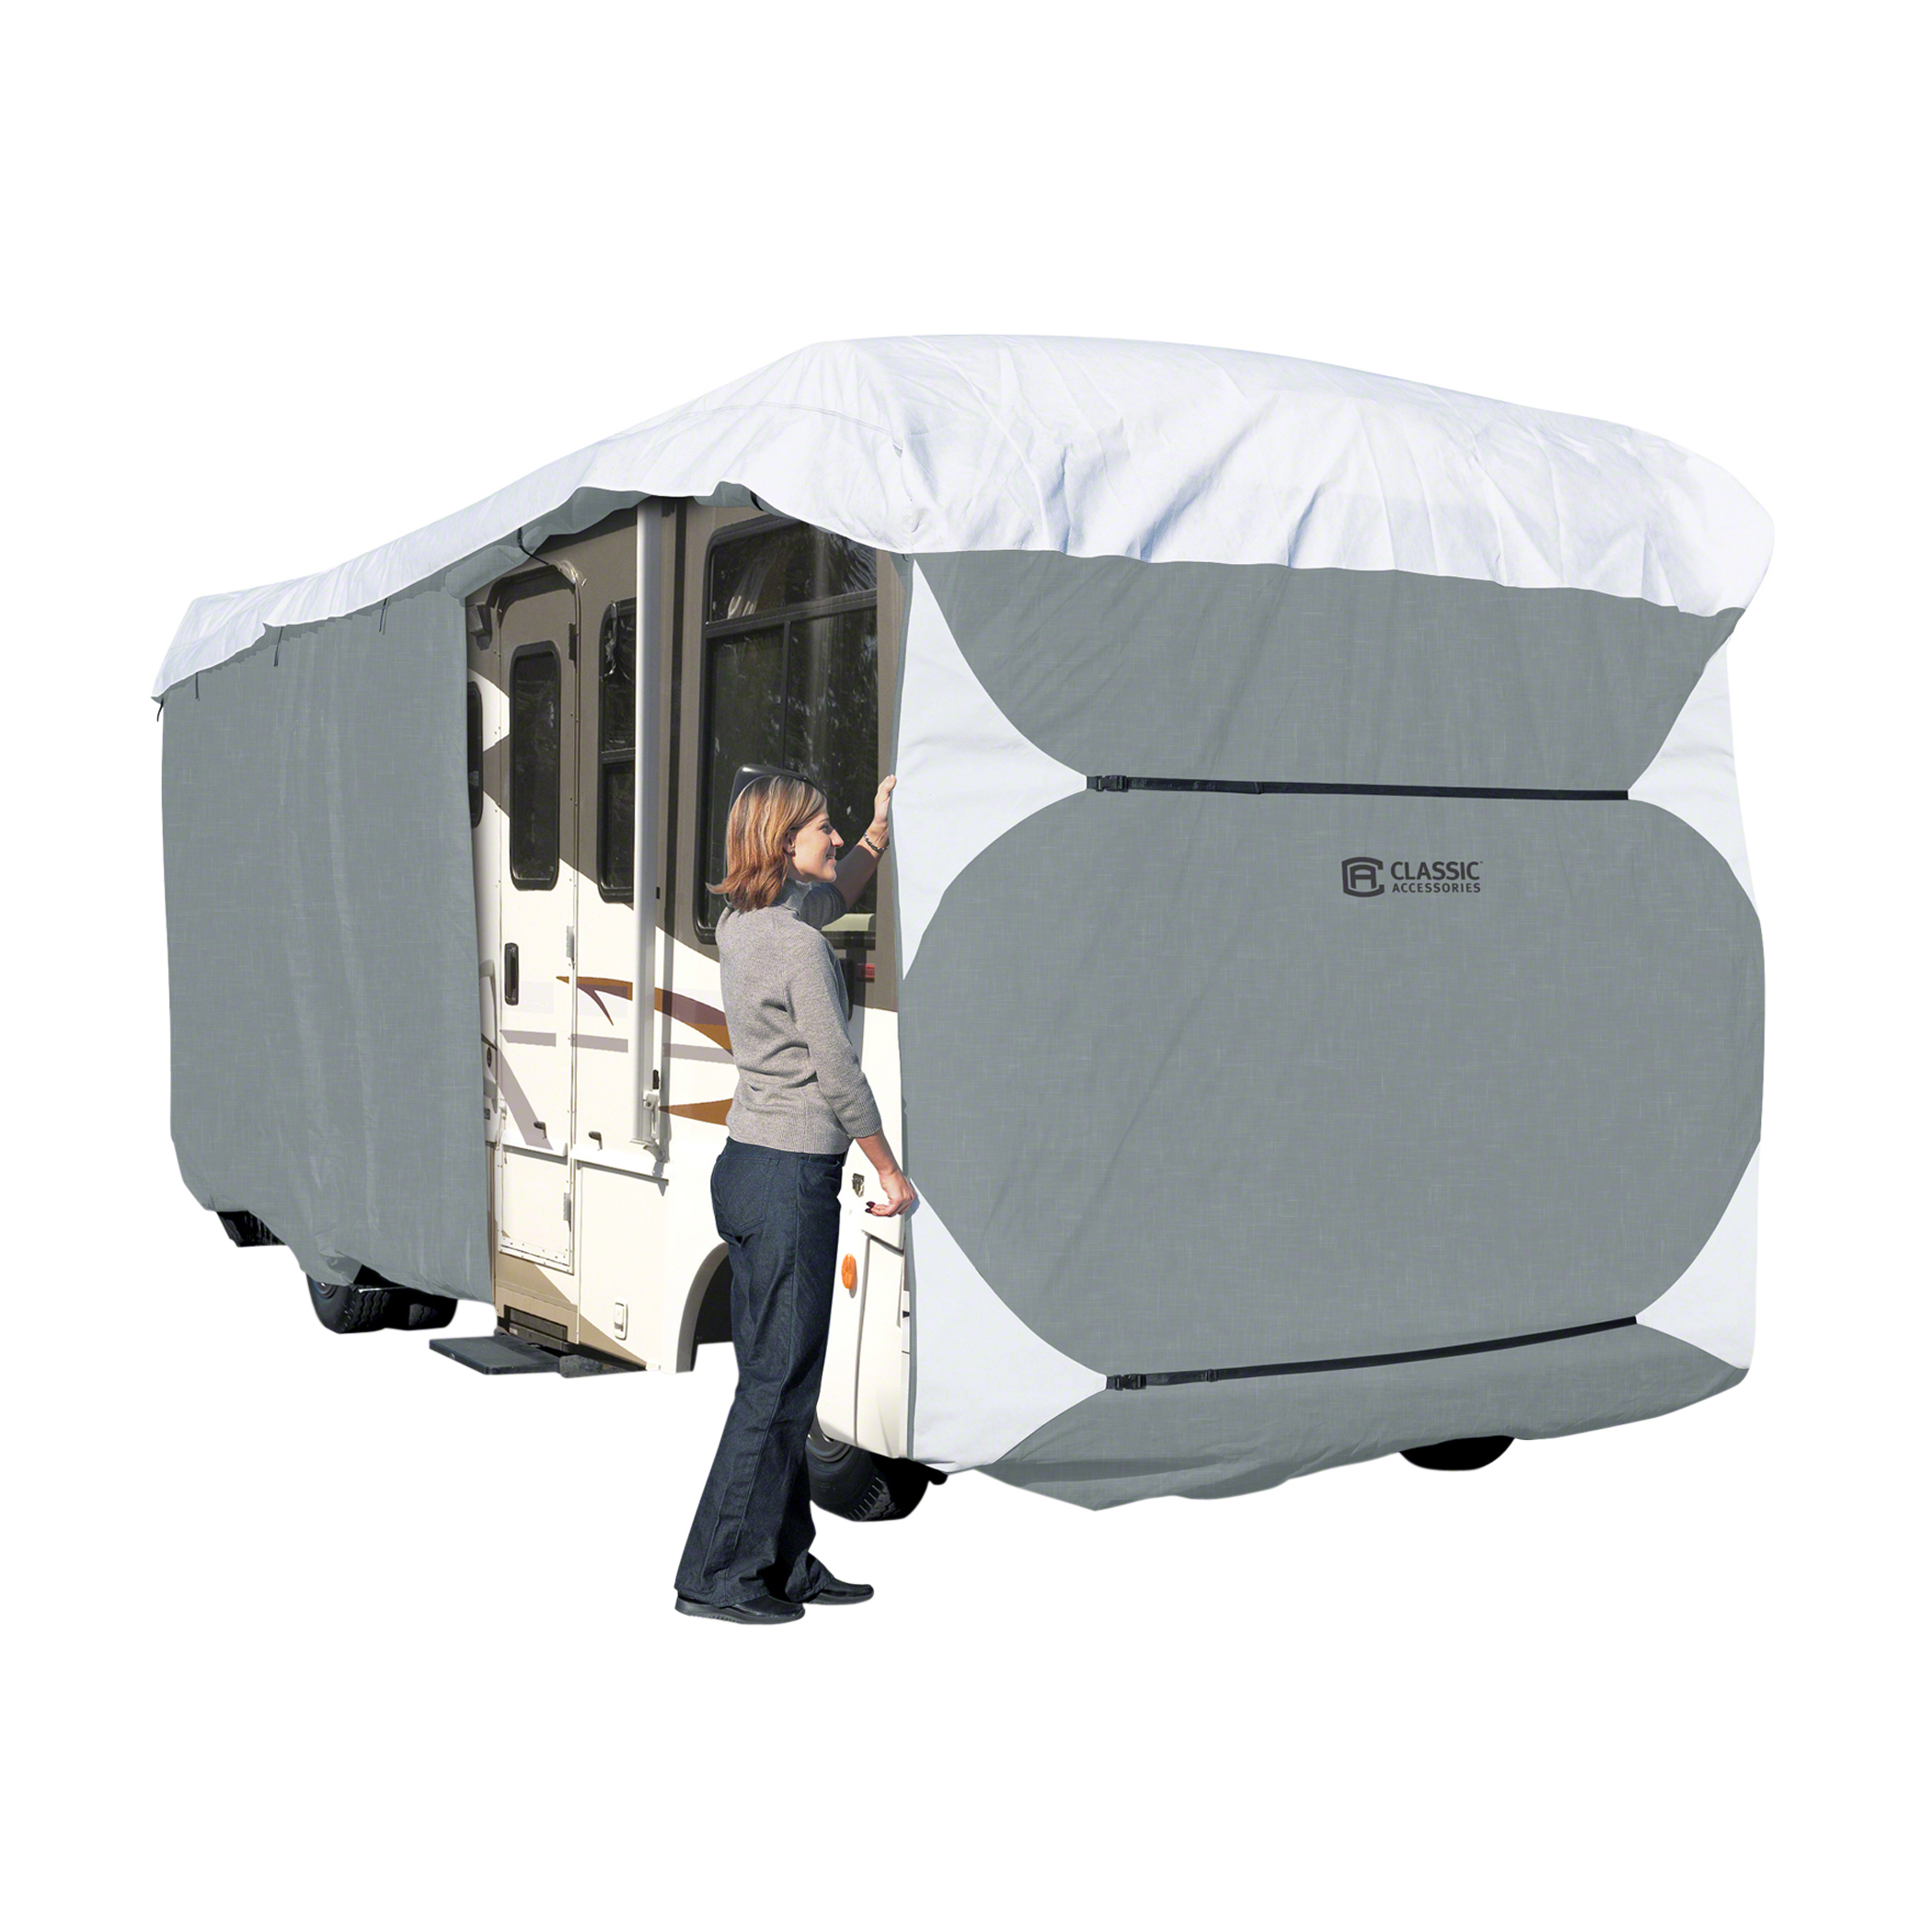 Classic Accessories OverDrive PolyPRO 3 Deluxe Class A RV Cover, Fits 24' - 28' RVs - Max Weather Protection with 3-Ply Poly Fabric Roof RV Cover (Model 3) - image 1 of 7